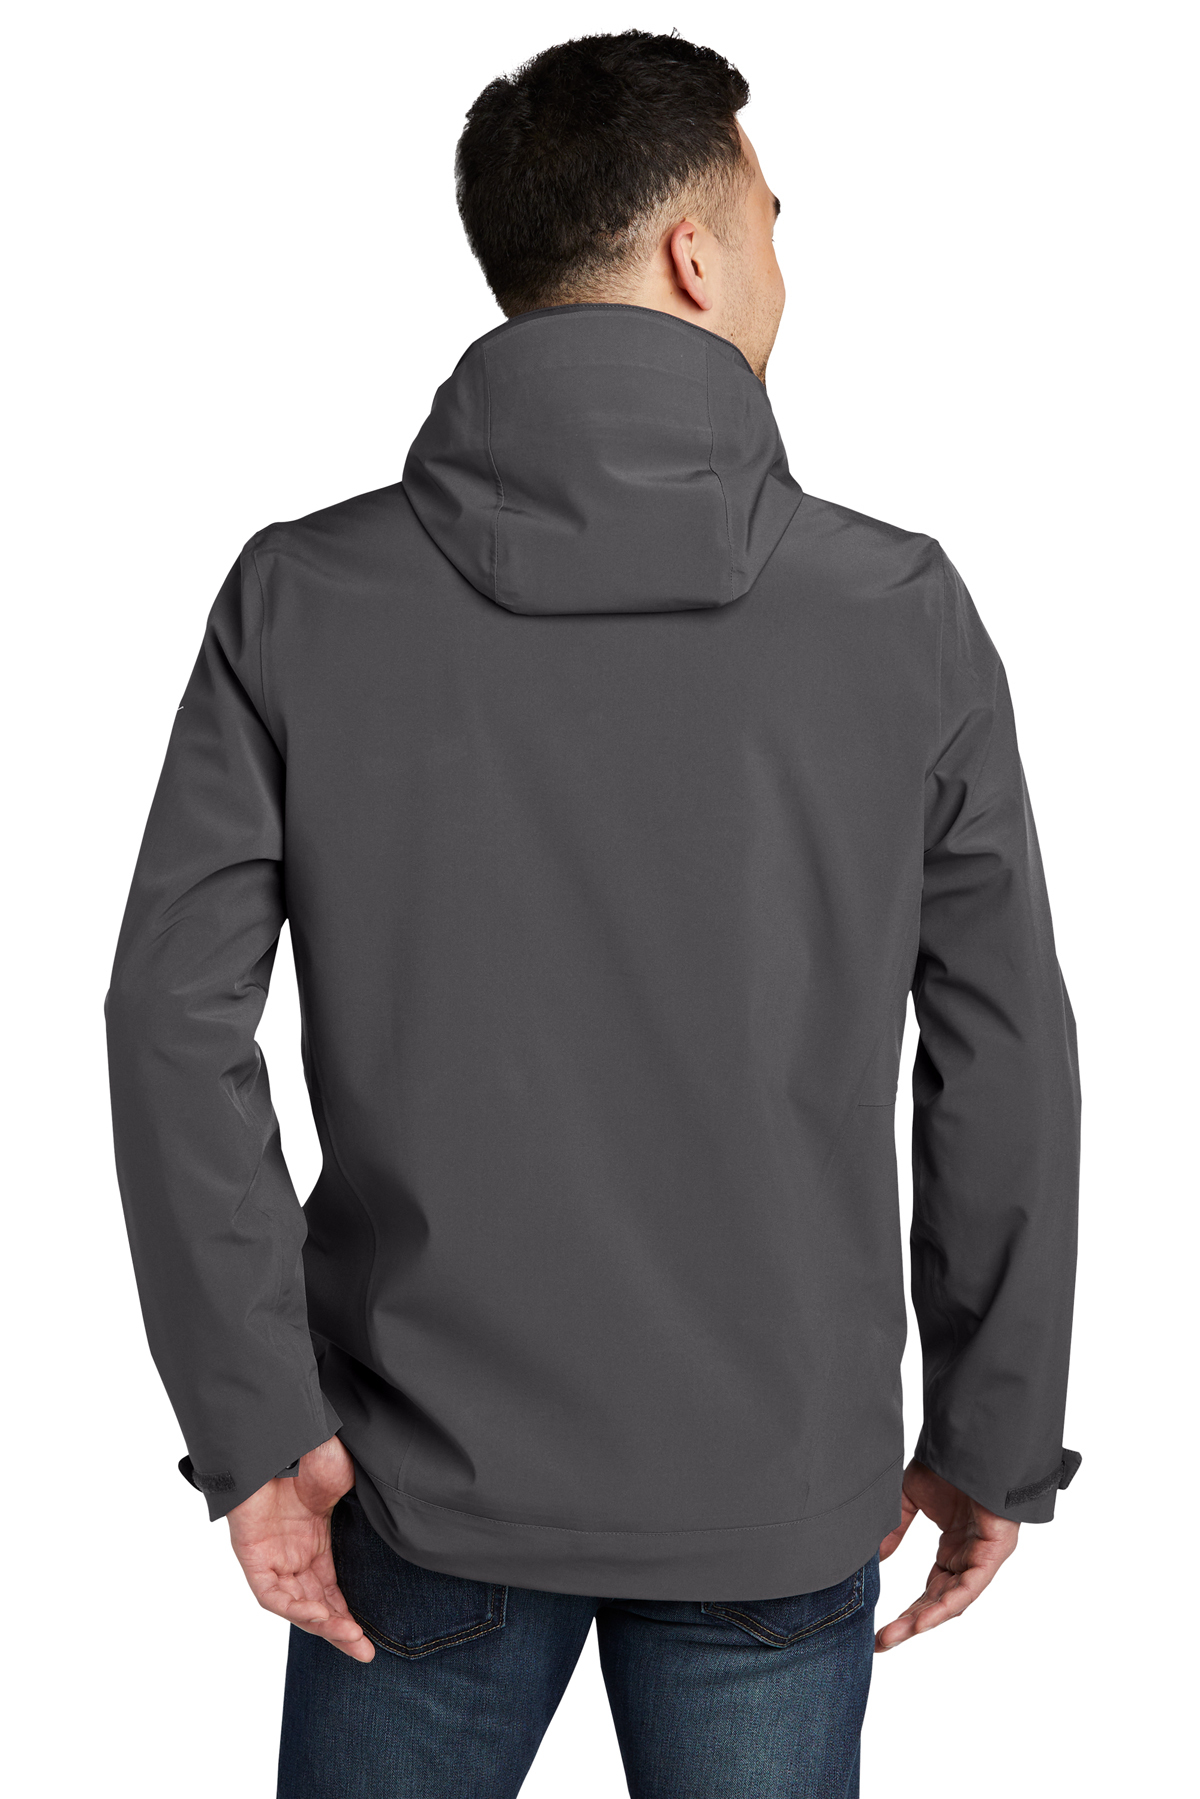 Eddie Bauer WeatherEdge 3-in-1 Jacket | Product | Company Casuals